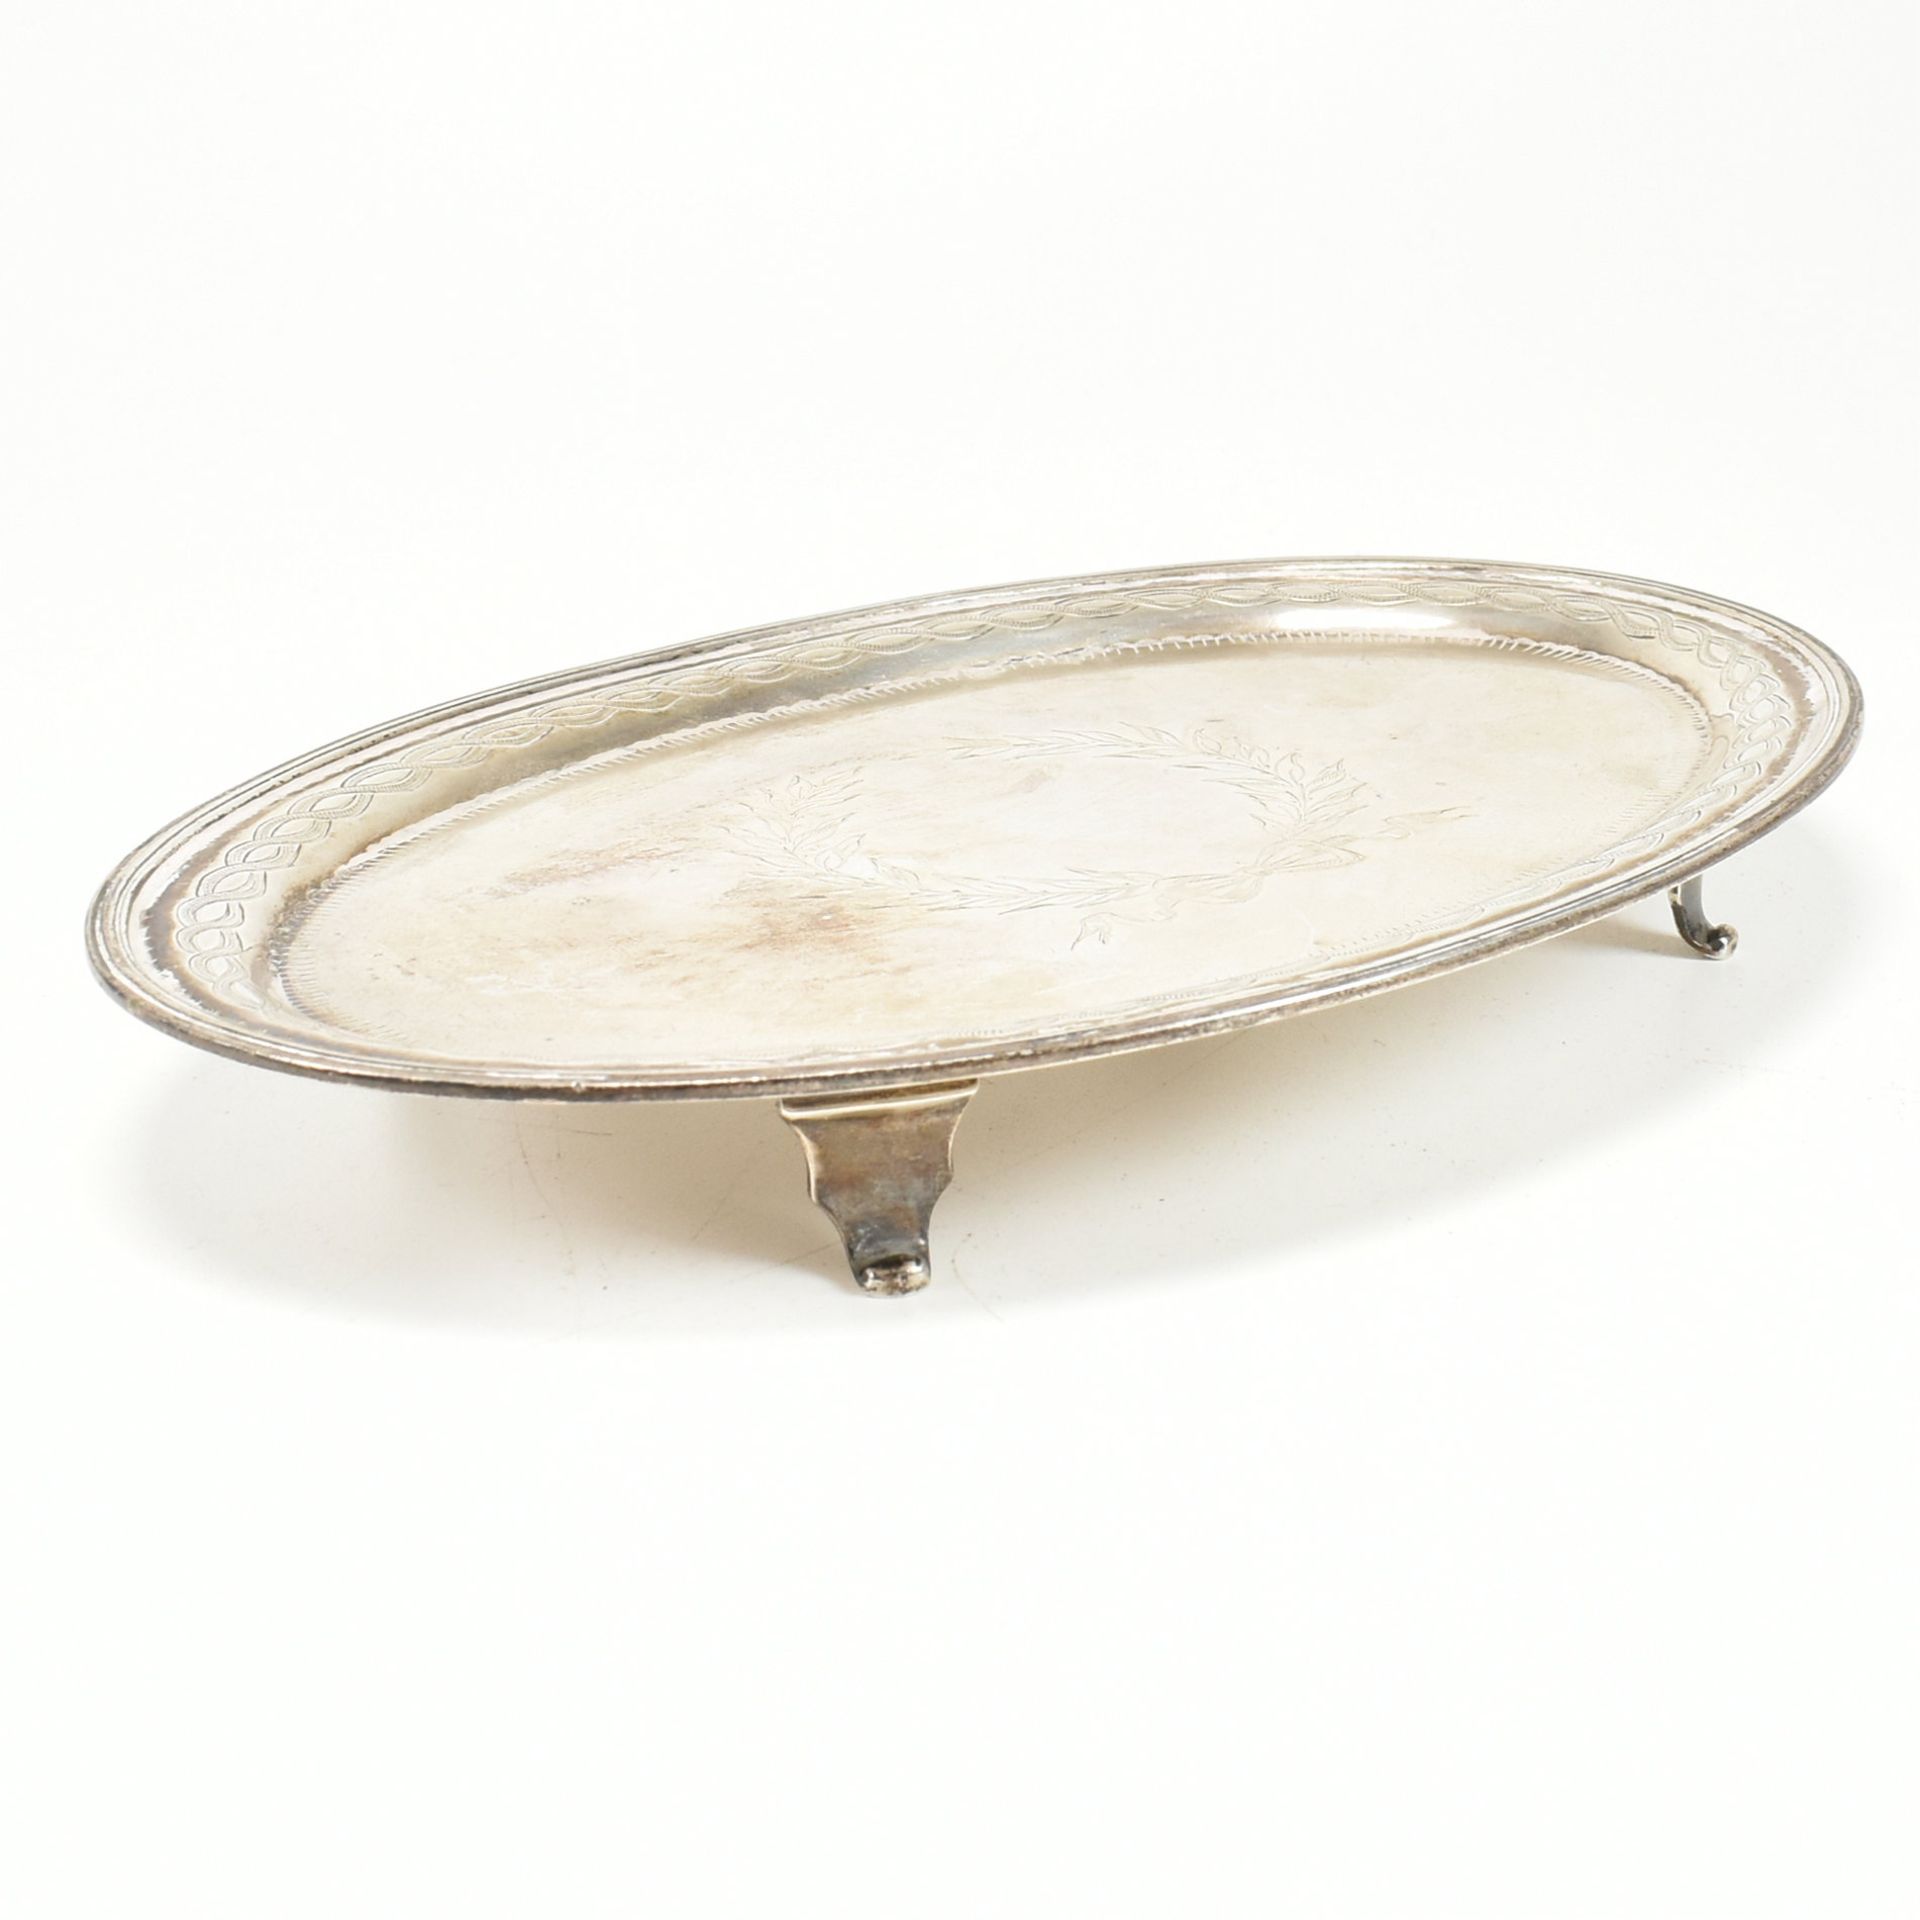 GEORGE V HALLMARKED SILVER TRAY - Image 2 of 8